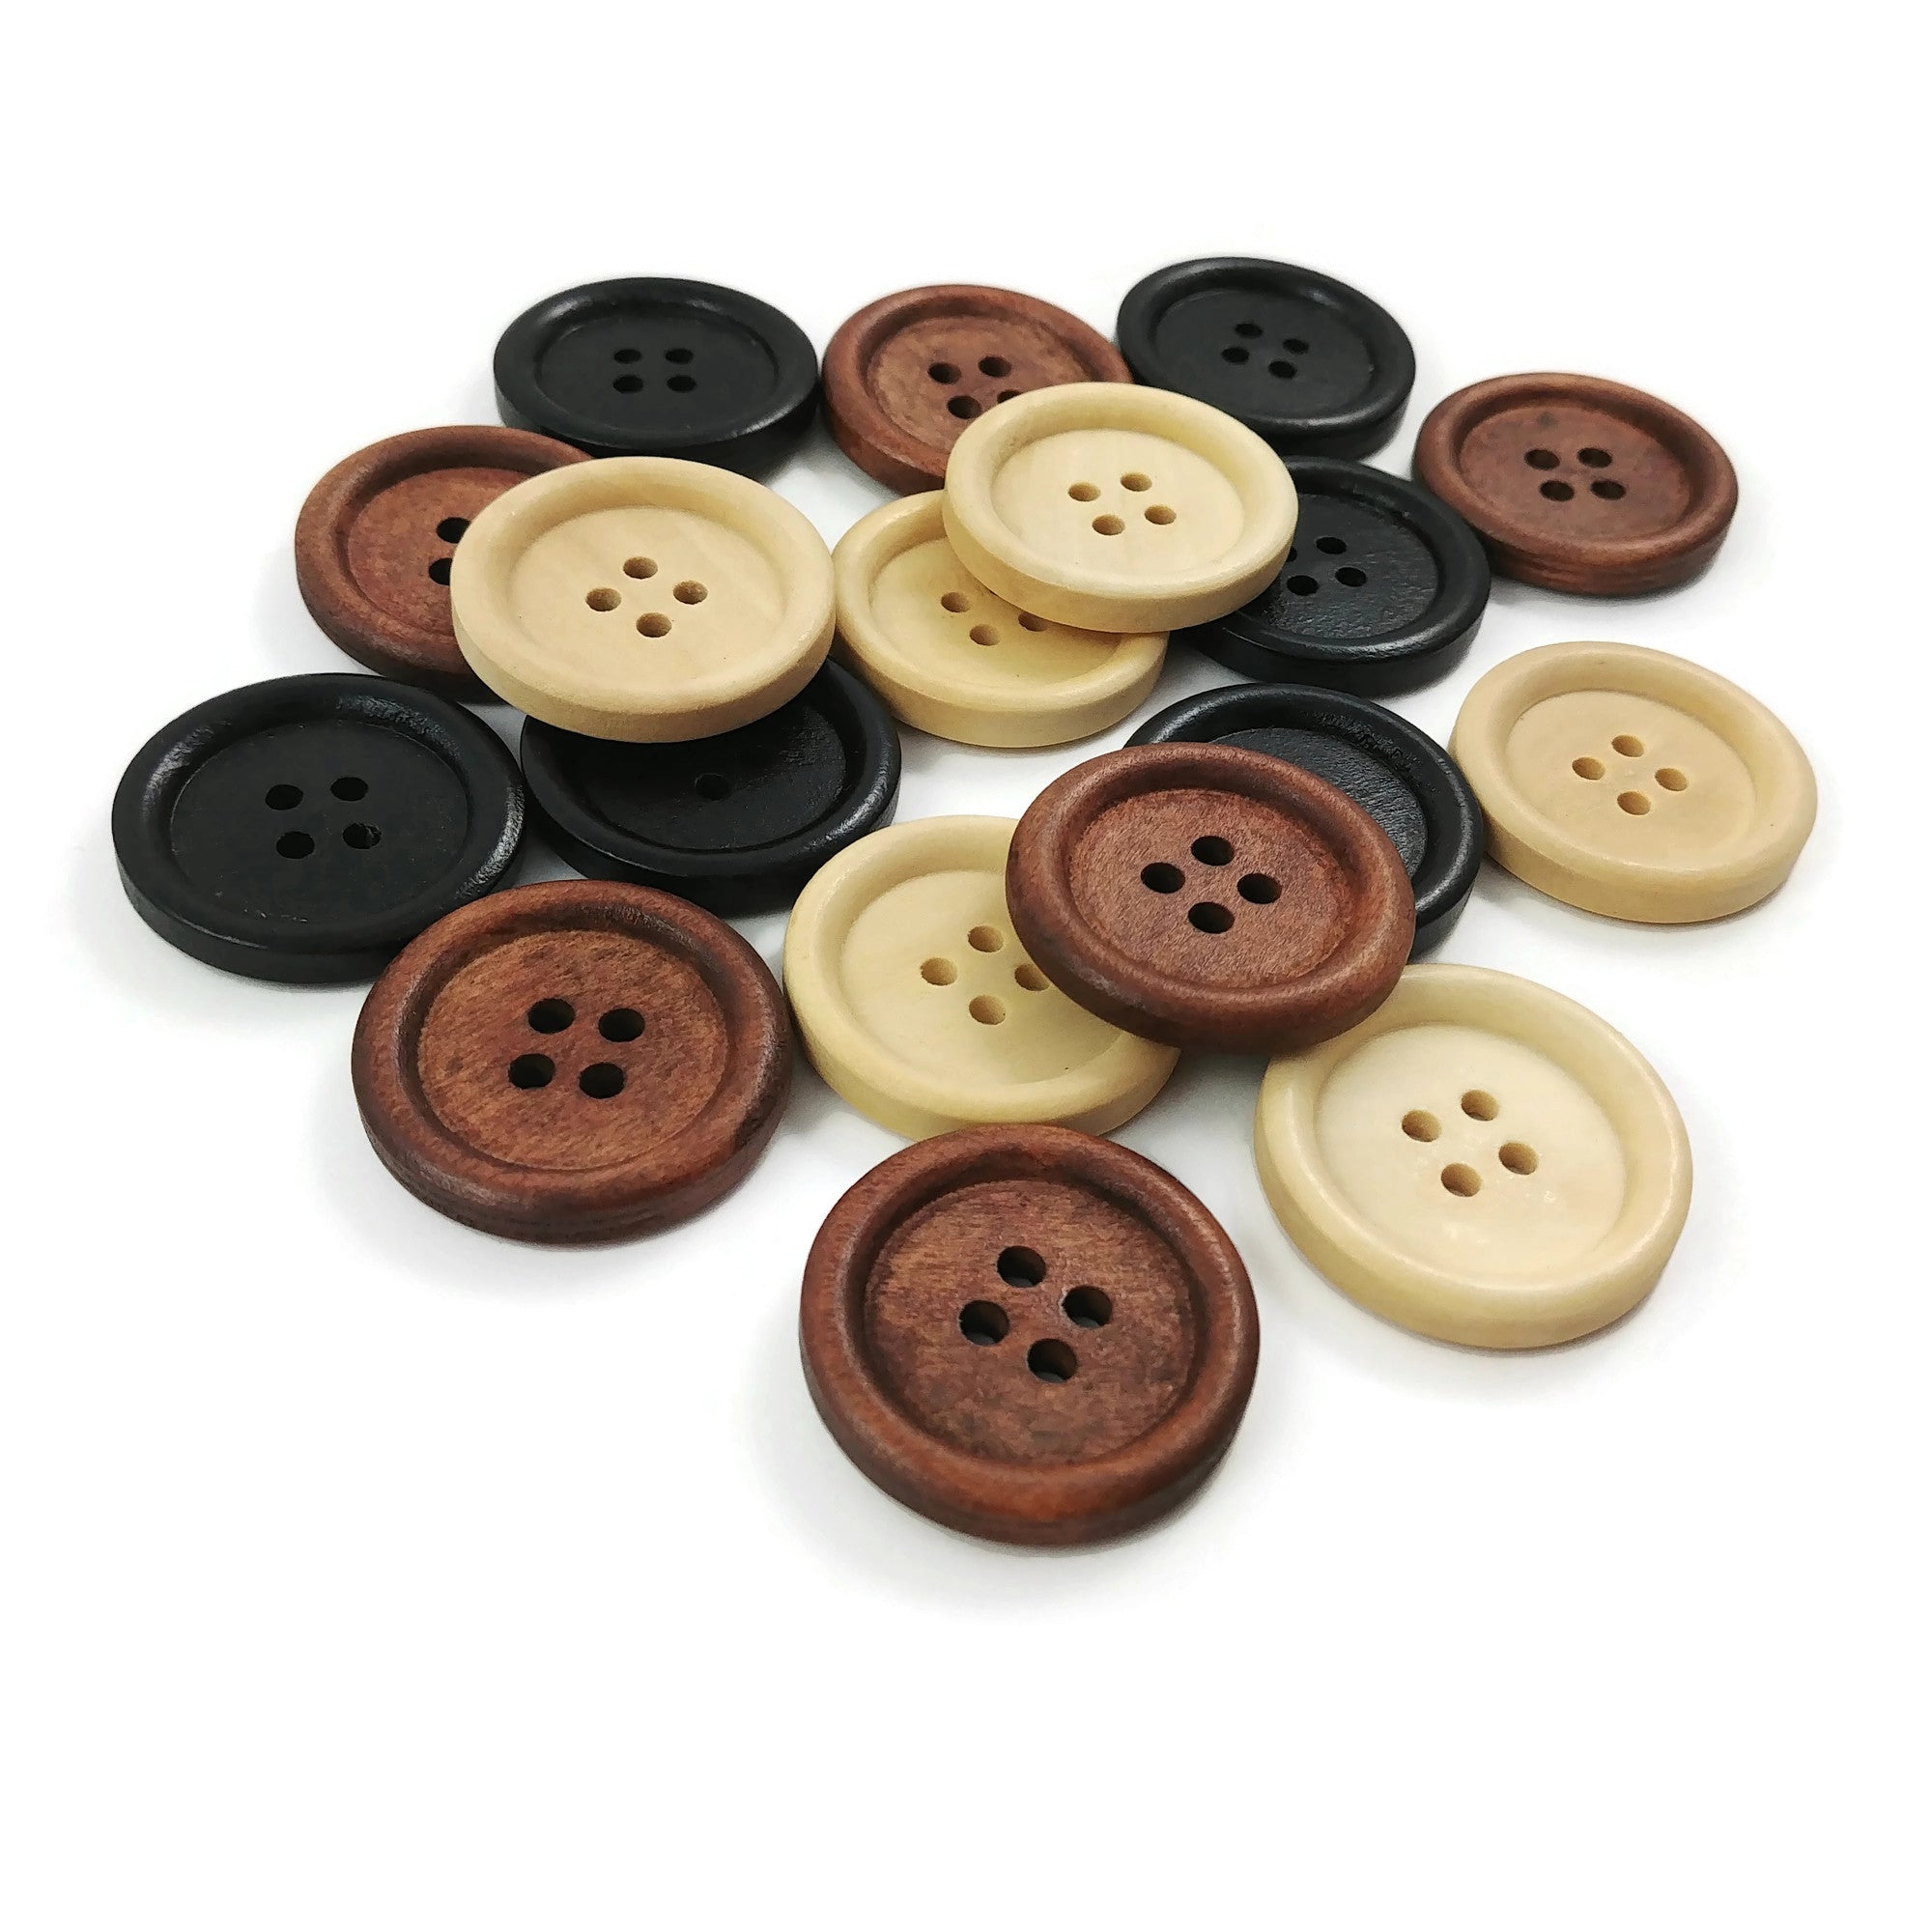 Large Wooden Buttons, 6 Brown Buttons, 35mm Sewing Buttons, Natural Buttons  for Knitting 